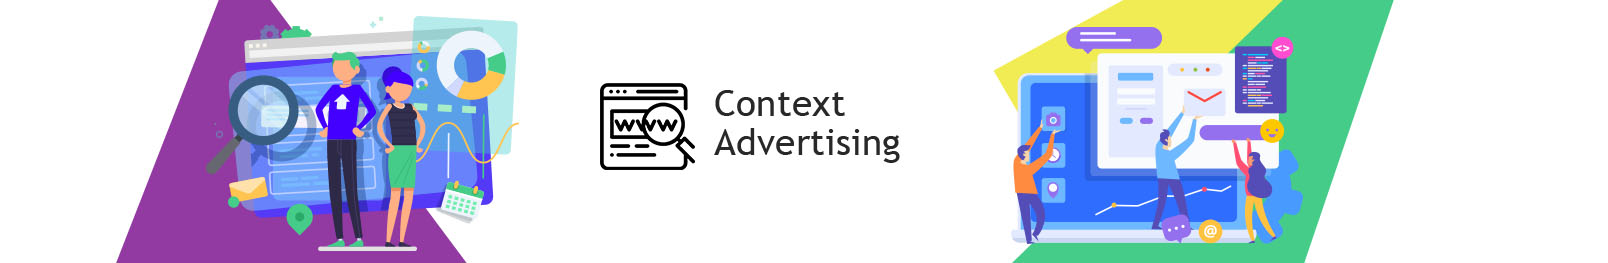  Order contextual advertising. Setting up site contextual advertising on a turn-key basis 